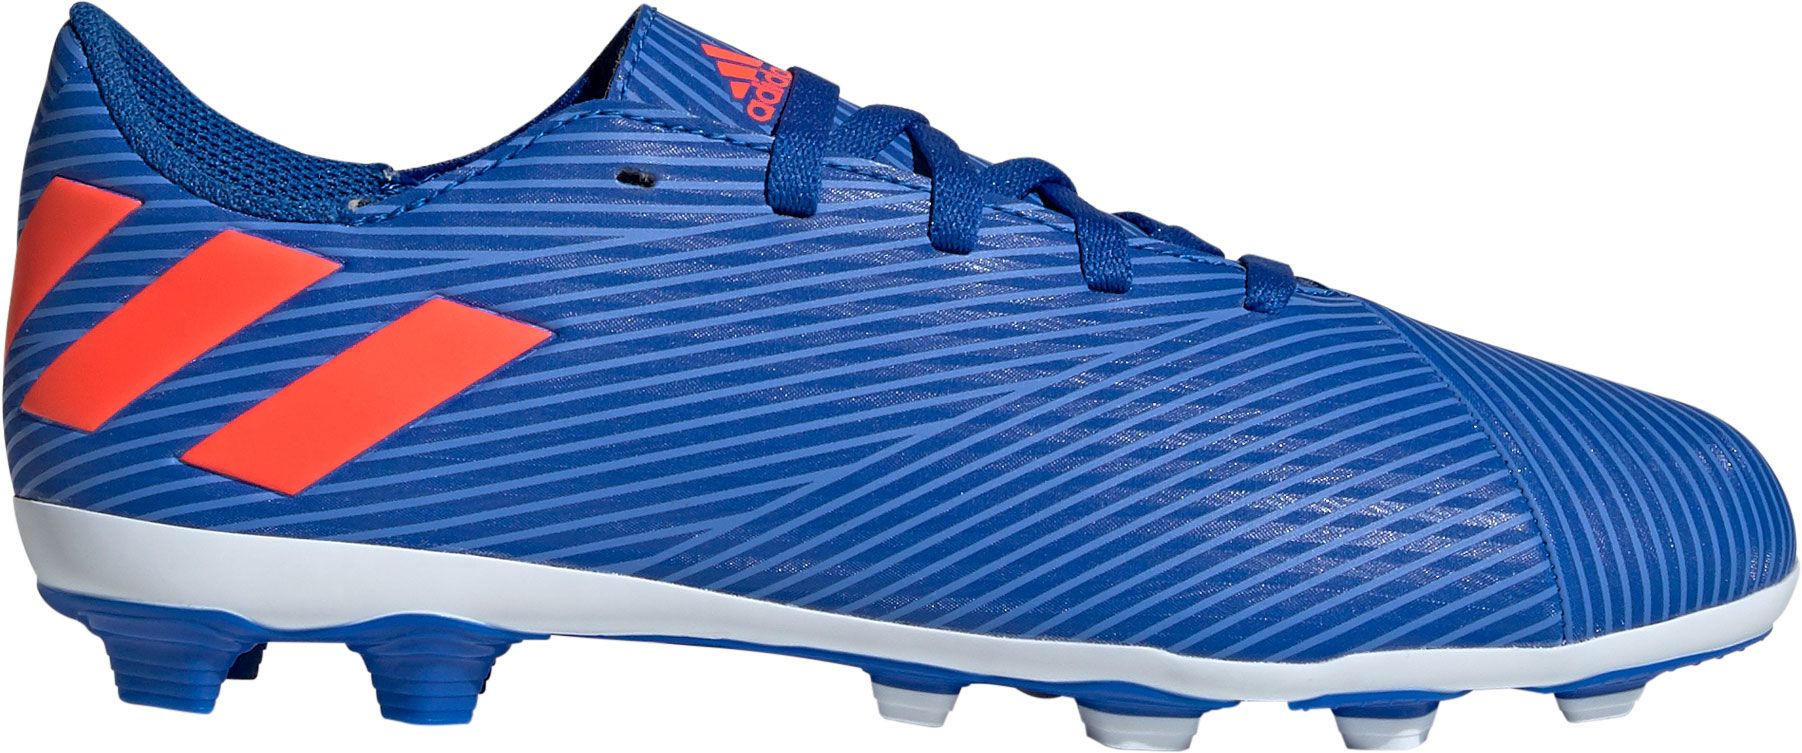 Kids' Messi Cleats | Best Price Guarantee at DICK'S